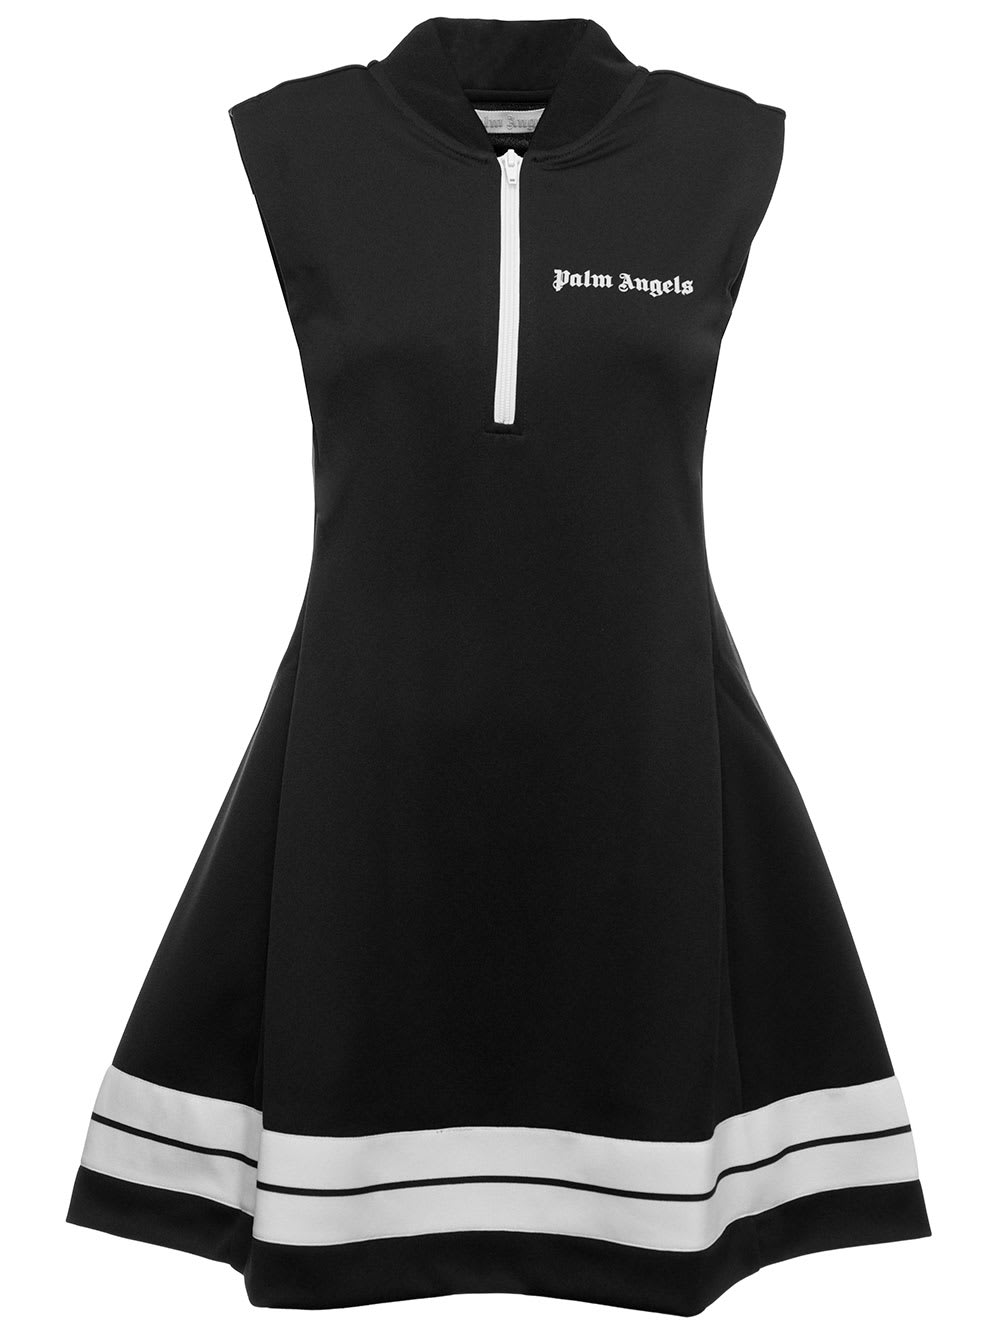 Track Black And White Technical Fabric Sleeveless Dress Palm Angels Woman